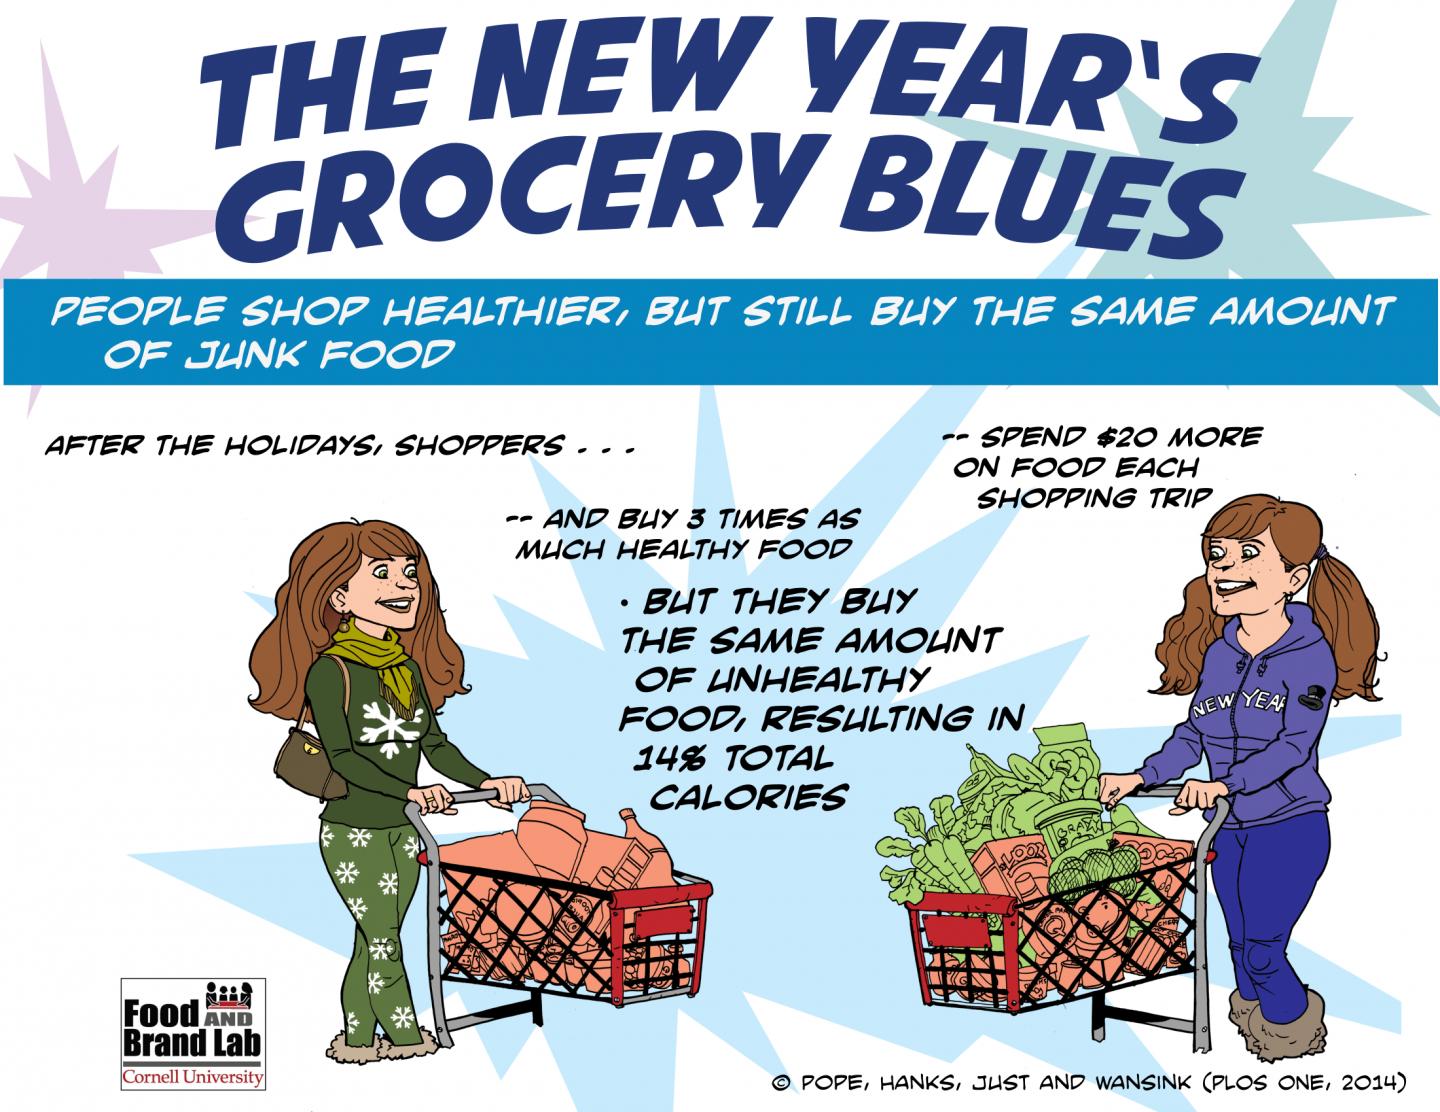 The New Year's Grocery Blues